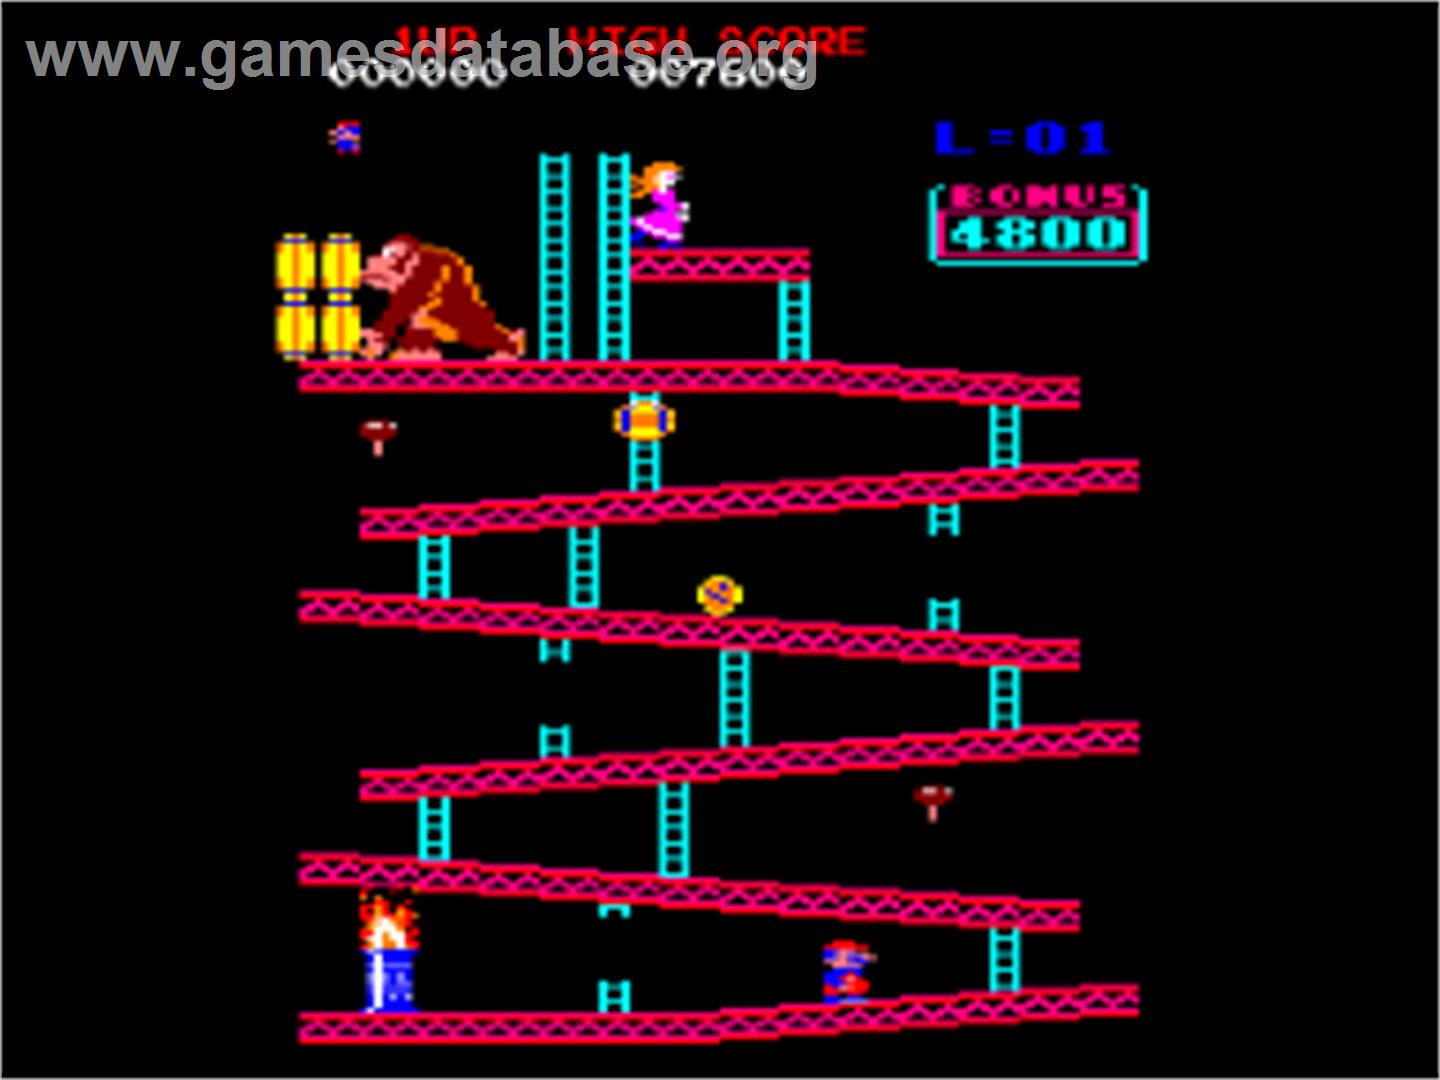 Donkey Kong - Amstrad CPC - Artwork - In Game